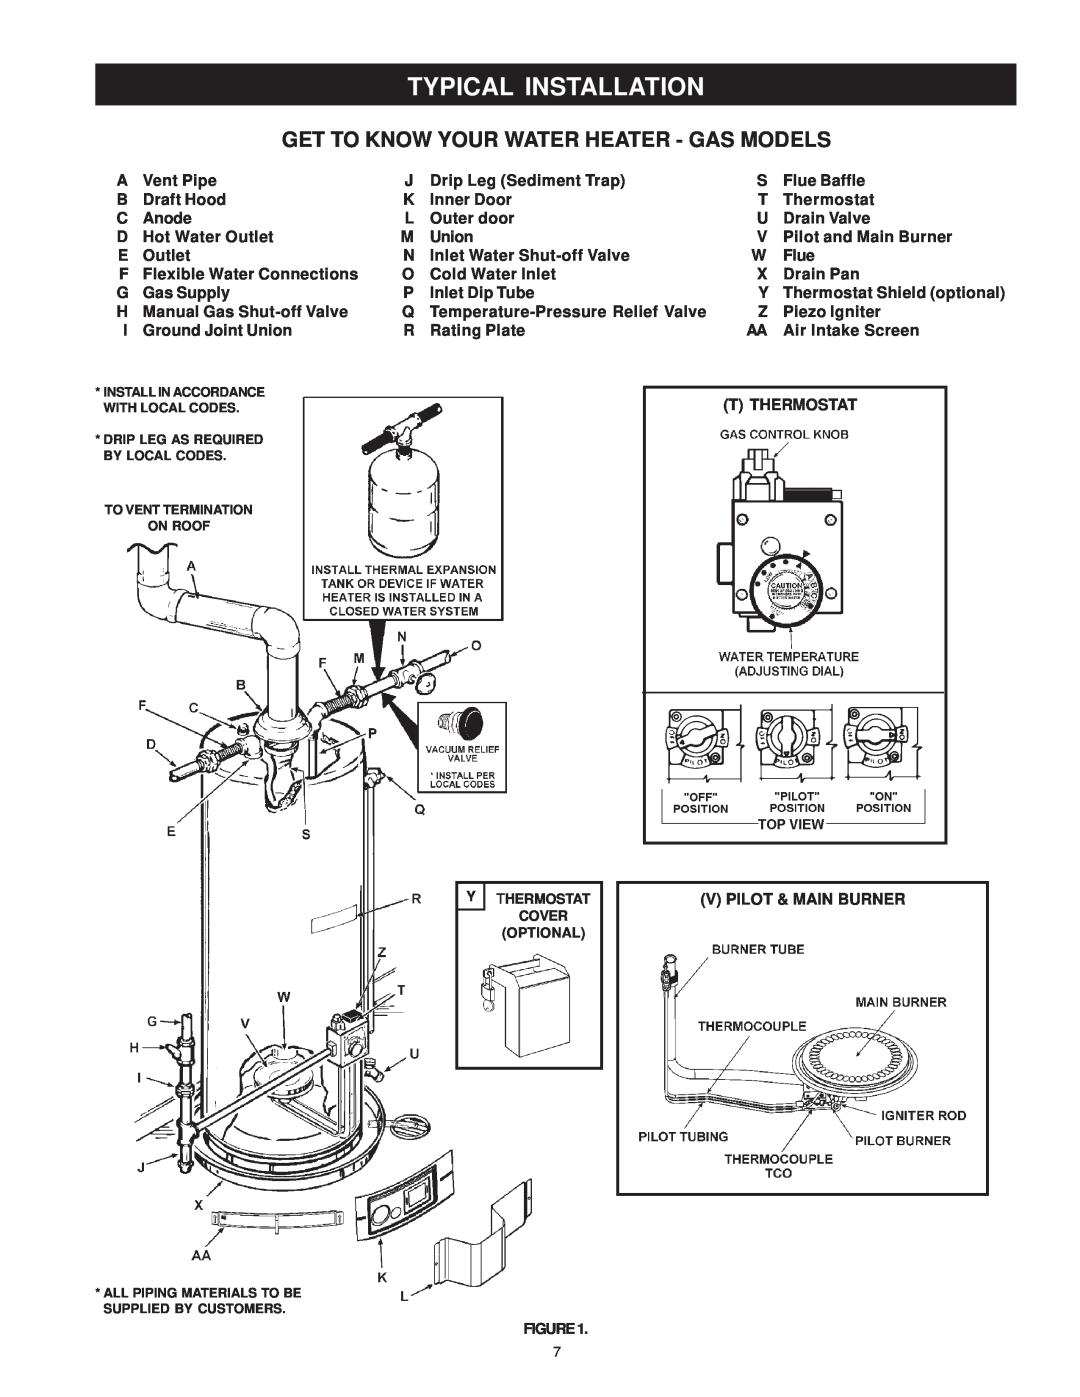 Sears 153.336762 30 GALLON PROPANE (L.P.), 153.336162 Typical Installation, Get To Know Your Water Heater - Gas Models 